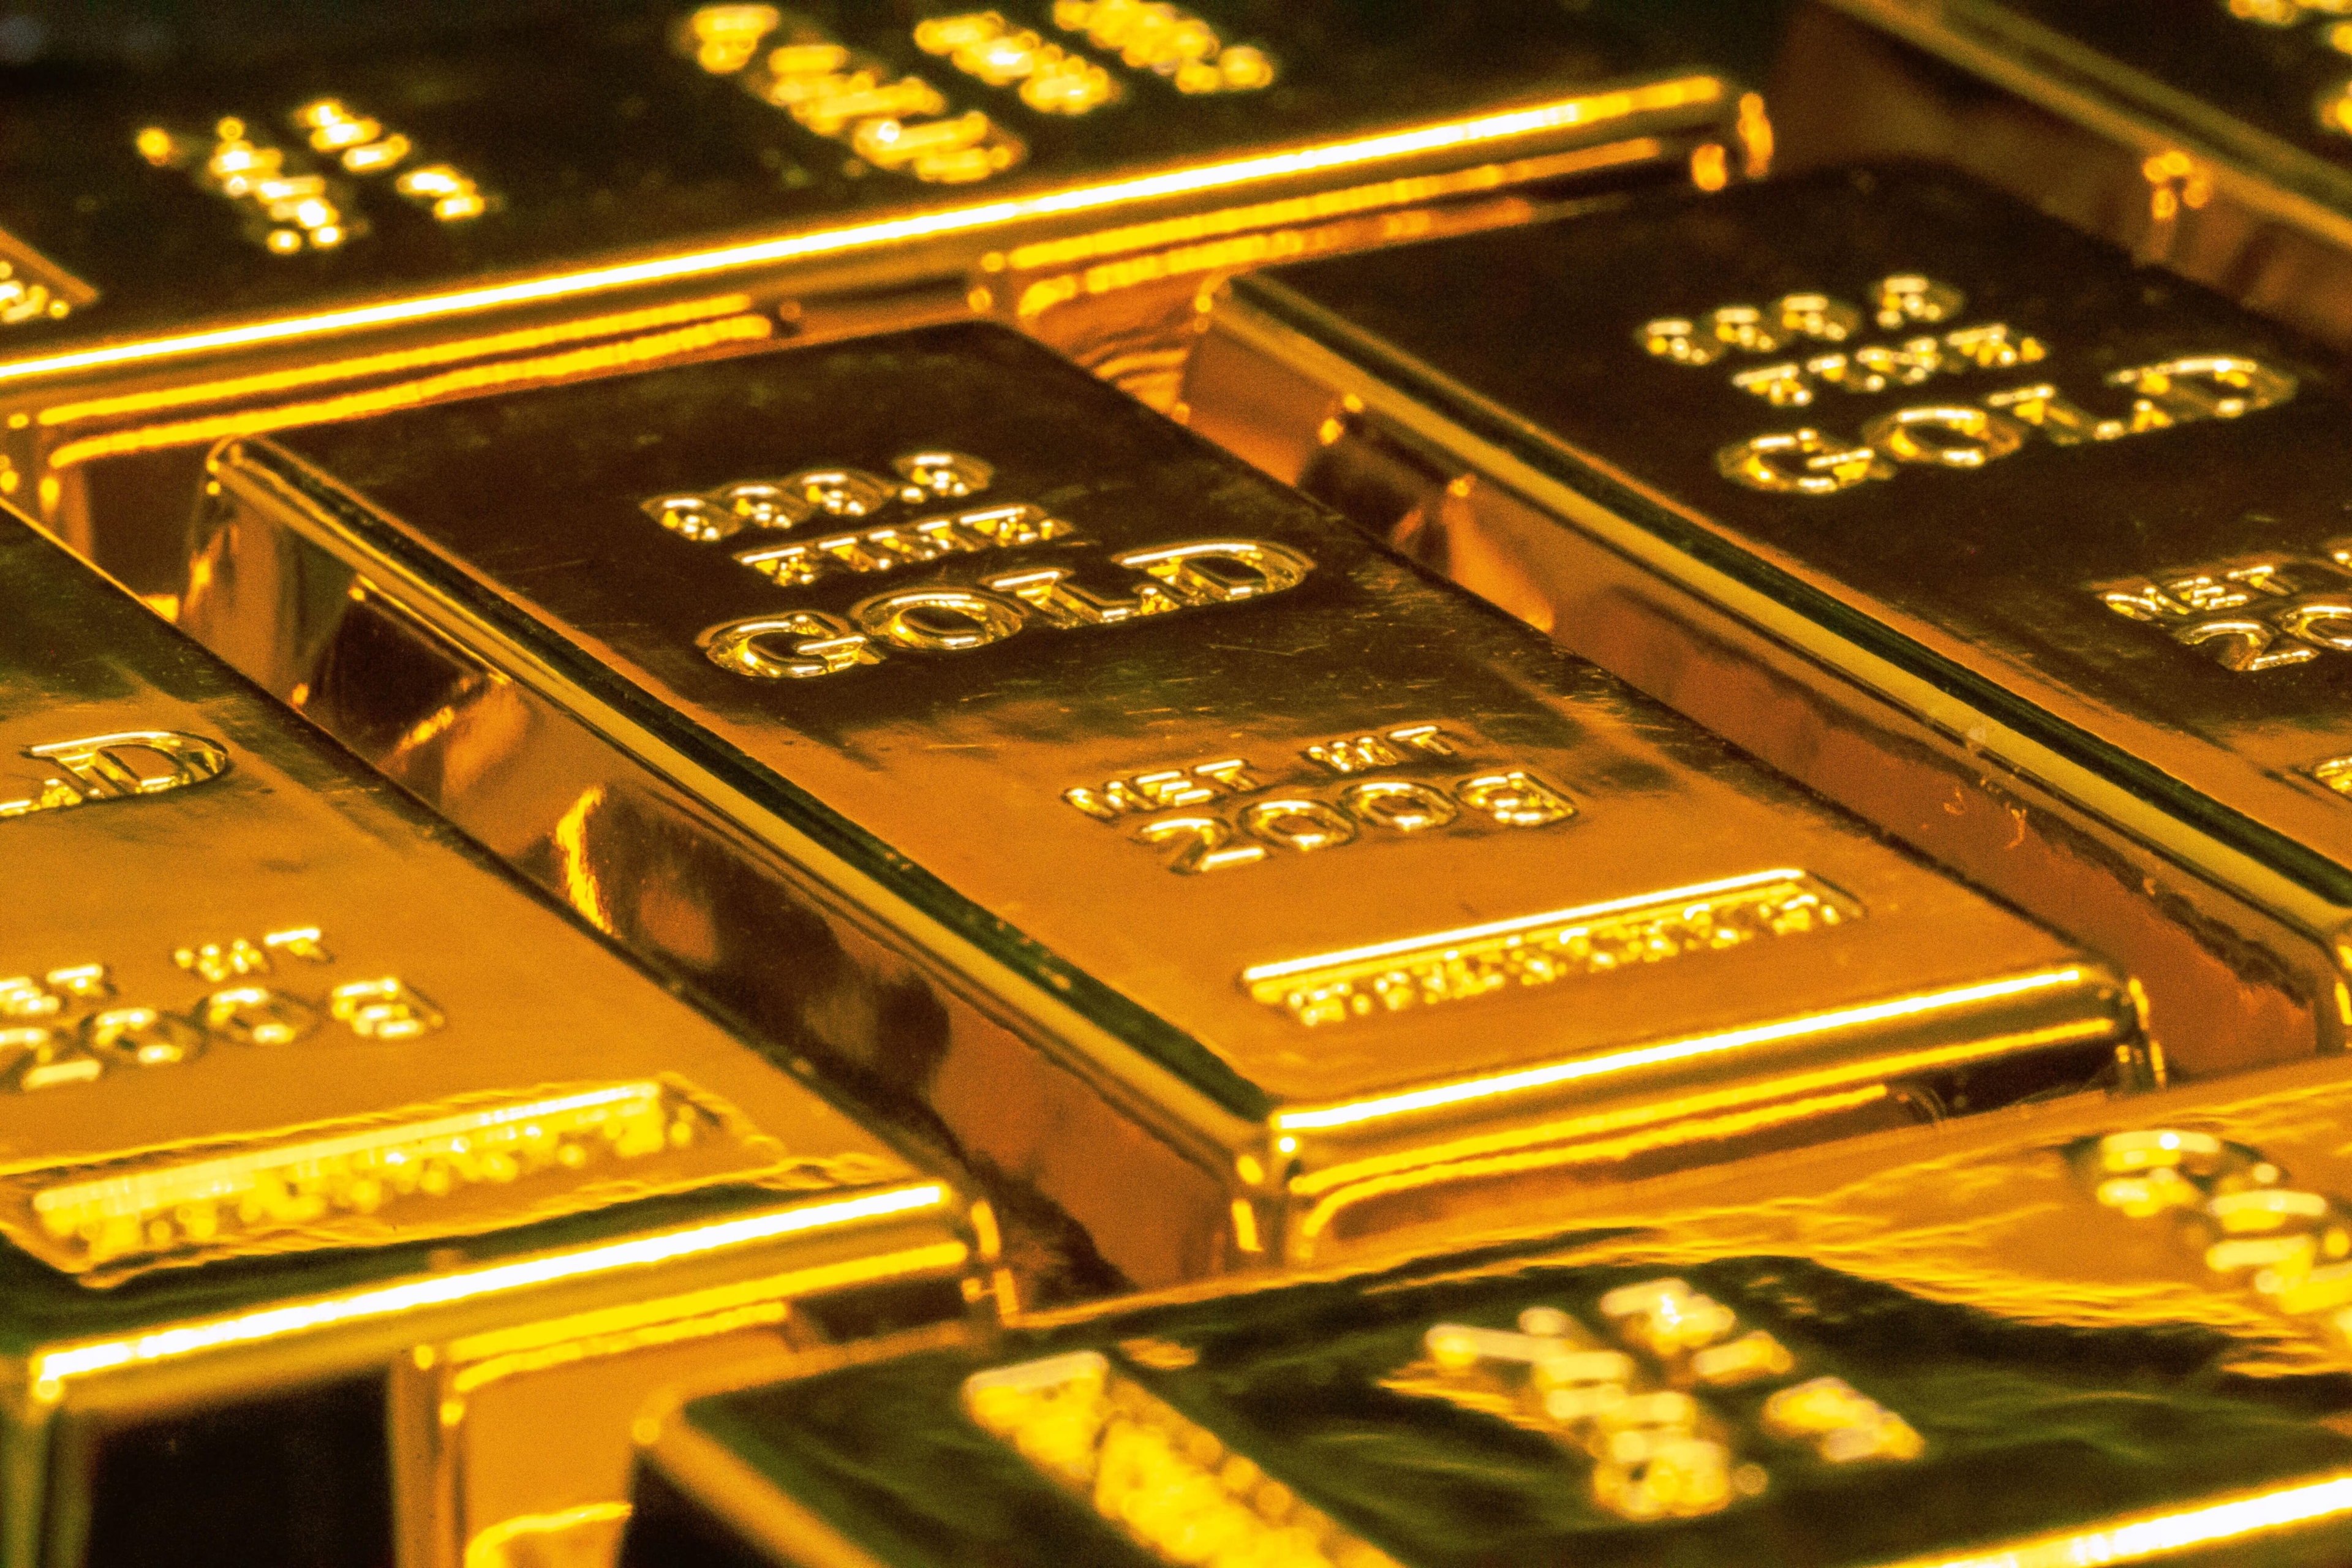 Gold settled on a weaker note in the international markets in the previous session on April 15 after record gains in the dollar. The dollar index surged to two year highs and triggered profit taking in precious metals. Gold June futures contract settled at $1,972.50 per troy ounce, down by 0.61 percent.